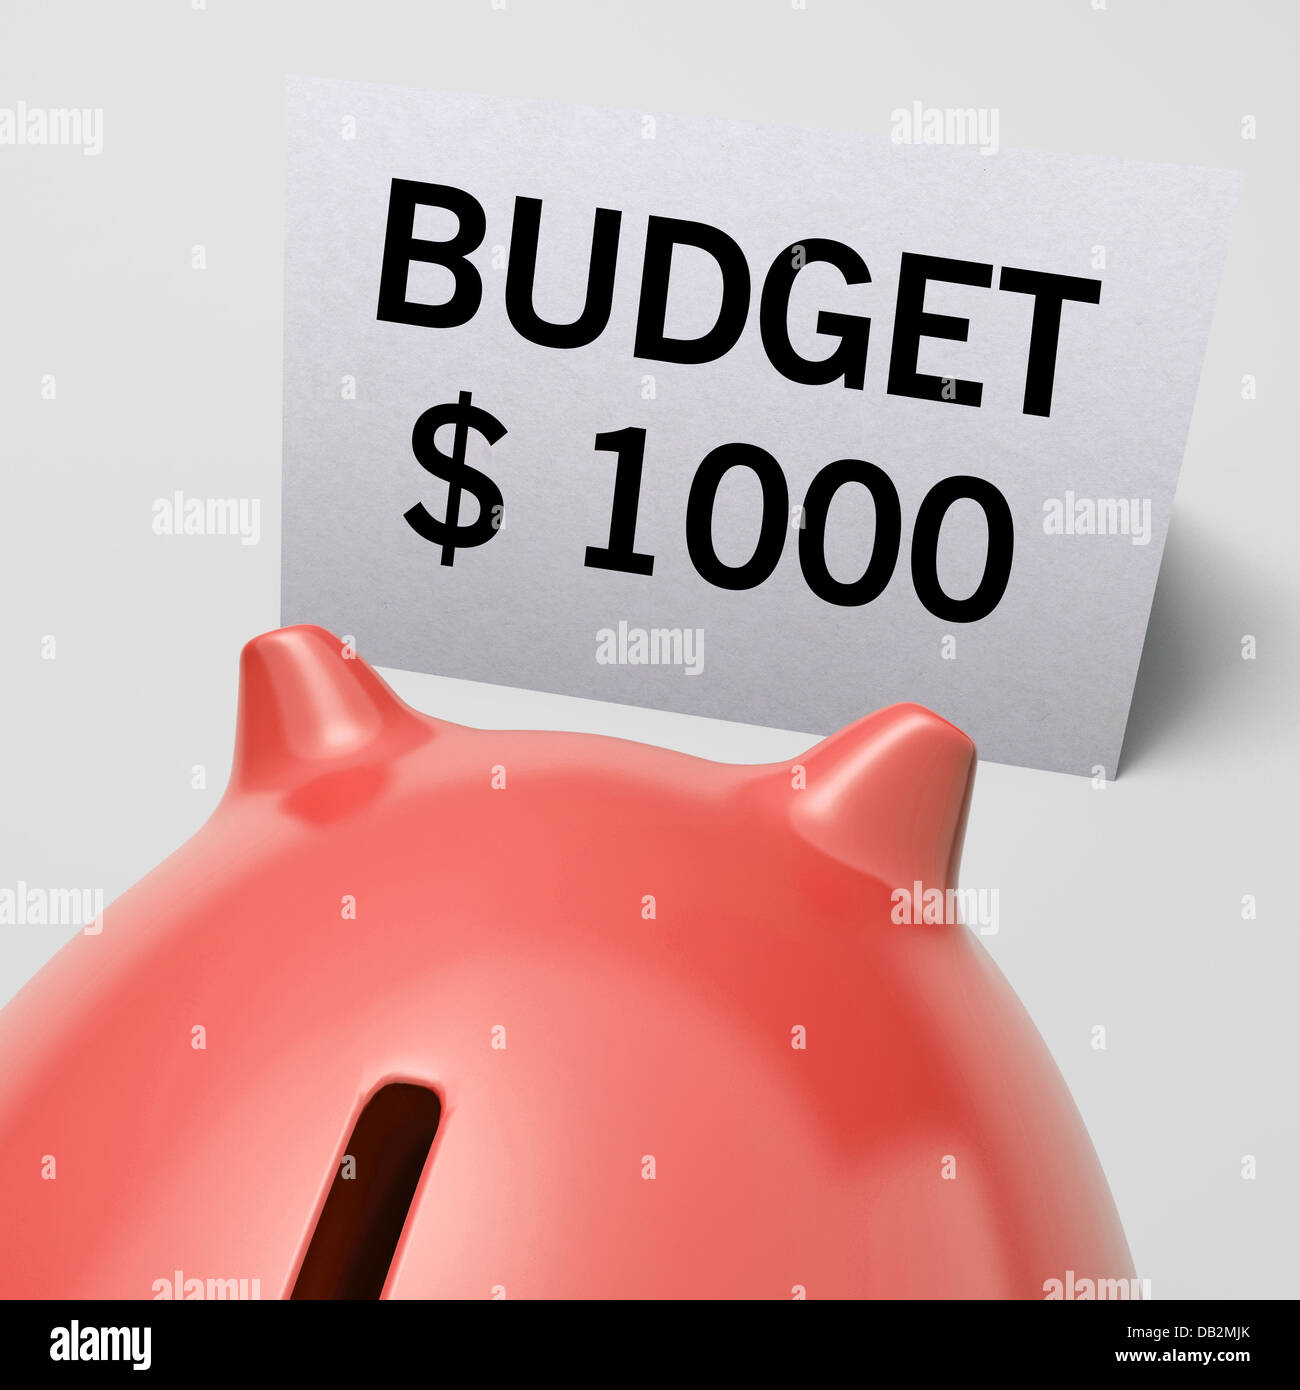 One Thousand dollars, usd Budget Shows Limitations Stock Photo